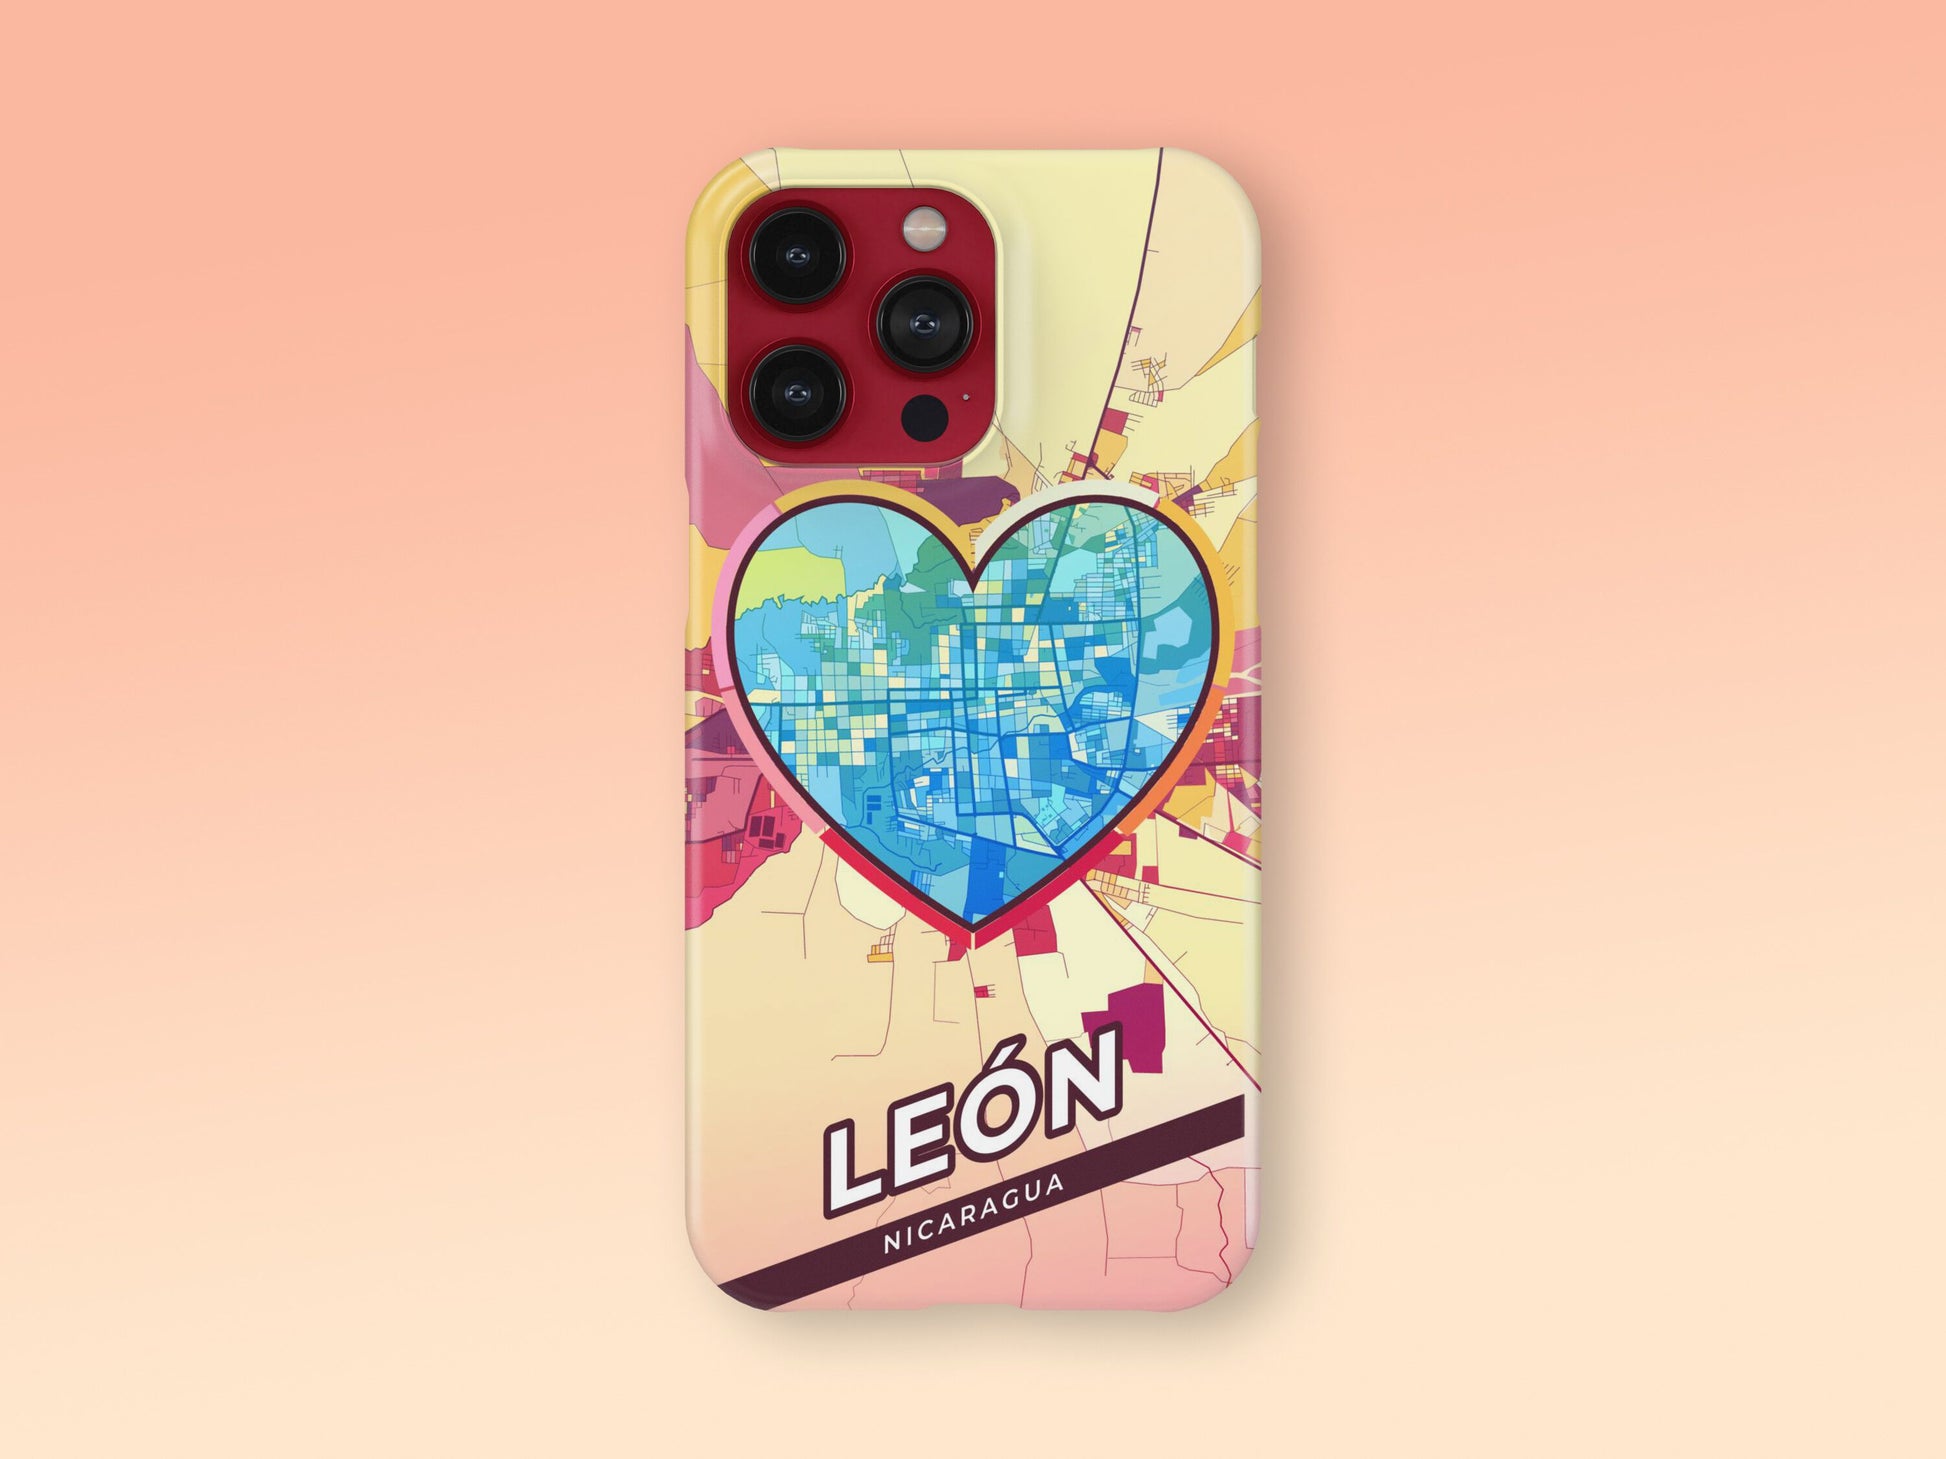 León Nicaragua slim phone case with colorful icon. Birthday, wedding or housewarming gift. Couple match cases. 2